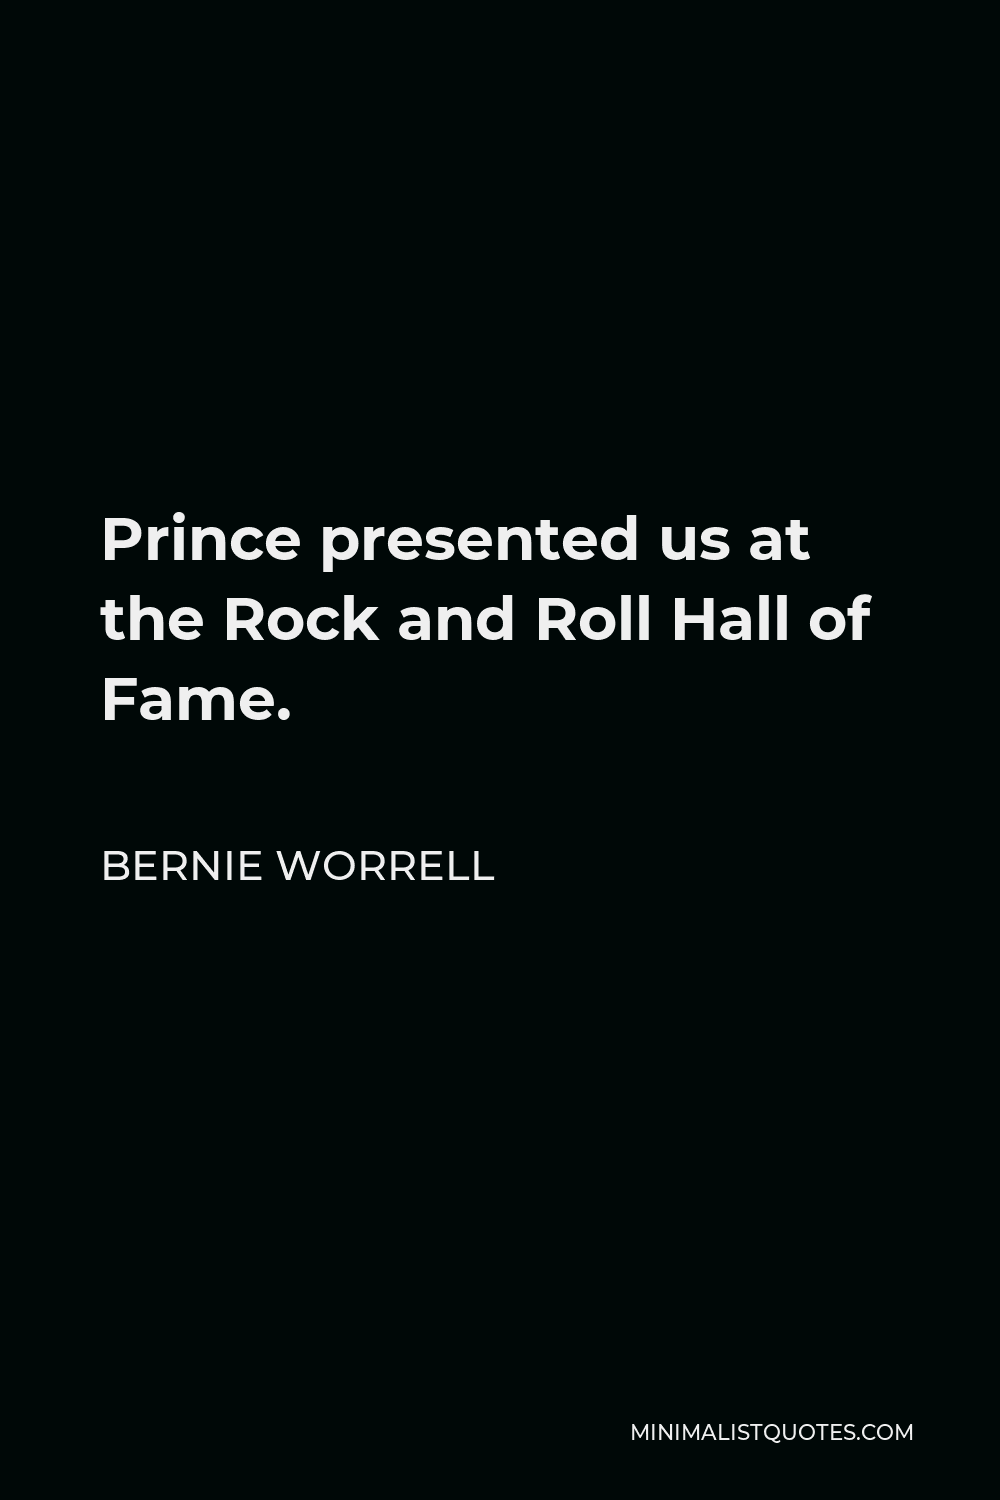 Bernie Worrell Quote - Prince presented us at the Rock and Roll Hall of Fame.